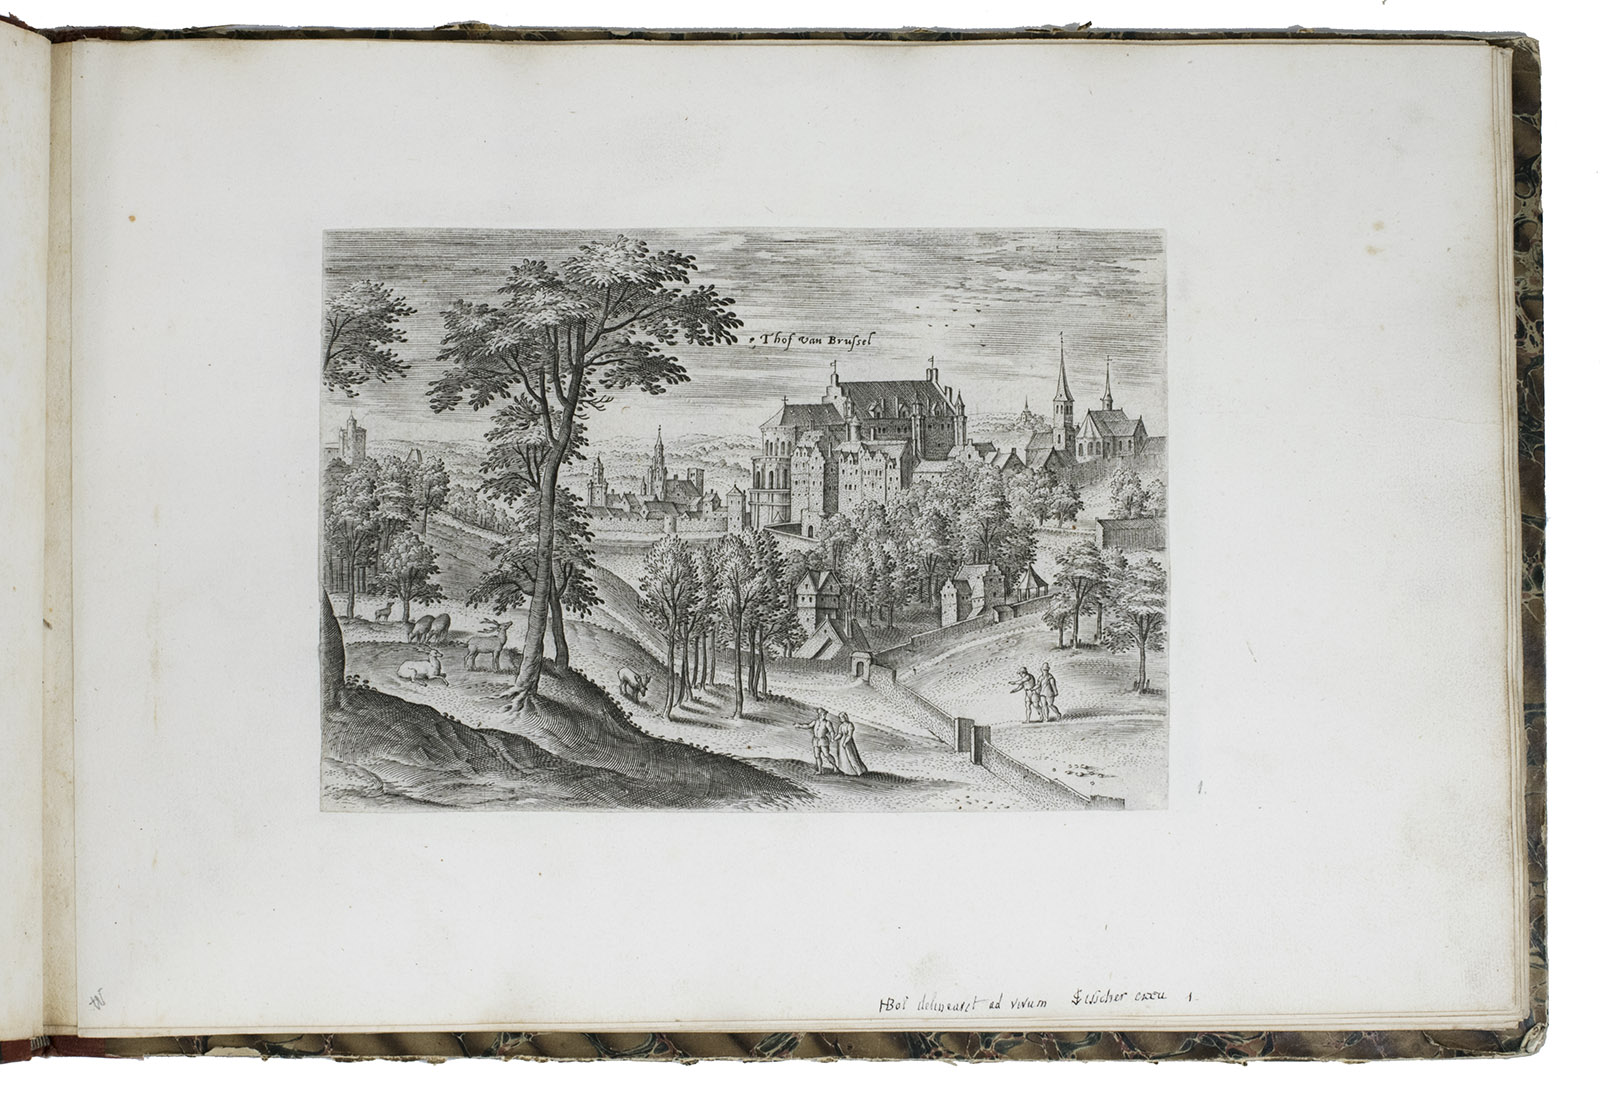 [VIEWS - BRUSSELS AREA]. COLLAERT, Hans I [after Hans BOL or Jacob GRIMMER?]. - [Views in the vicinity of Brussels].[Antwerp], Hans van Luyck, [ca. 1575/80]. Oblong folio album (24.5 x 35.5 cm). Series of 24 engravings (plate size ca. 20 x 14 cm) with views of landscapes around Brussels, by Hans I Collaert possibly after Hans Bol or Jacob Grimmer, each with a caption in the plate (plates 8 and 20 also with Van Luyck and Collaert's monograms 